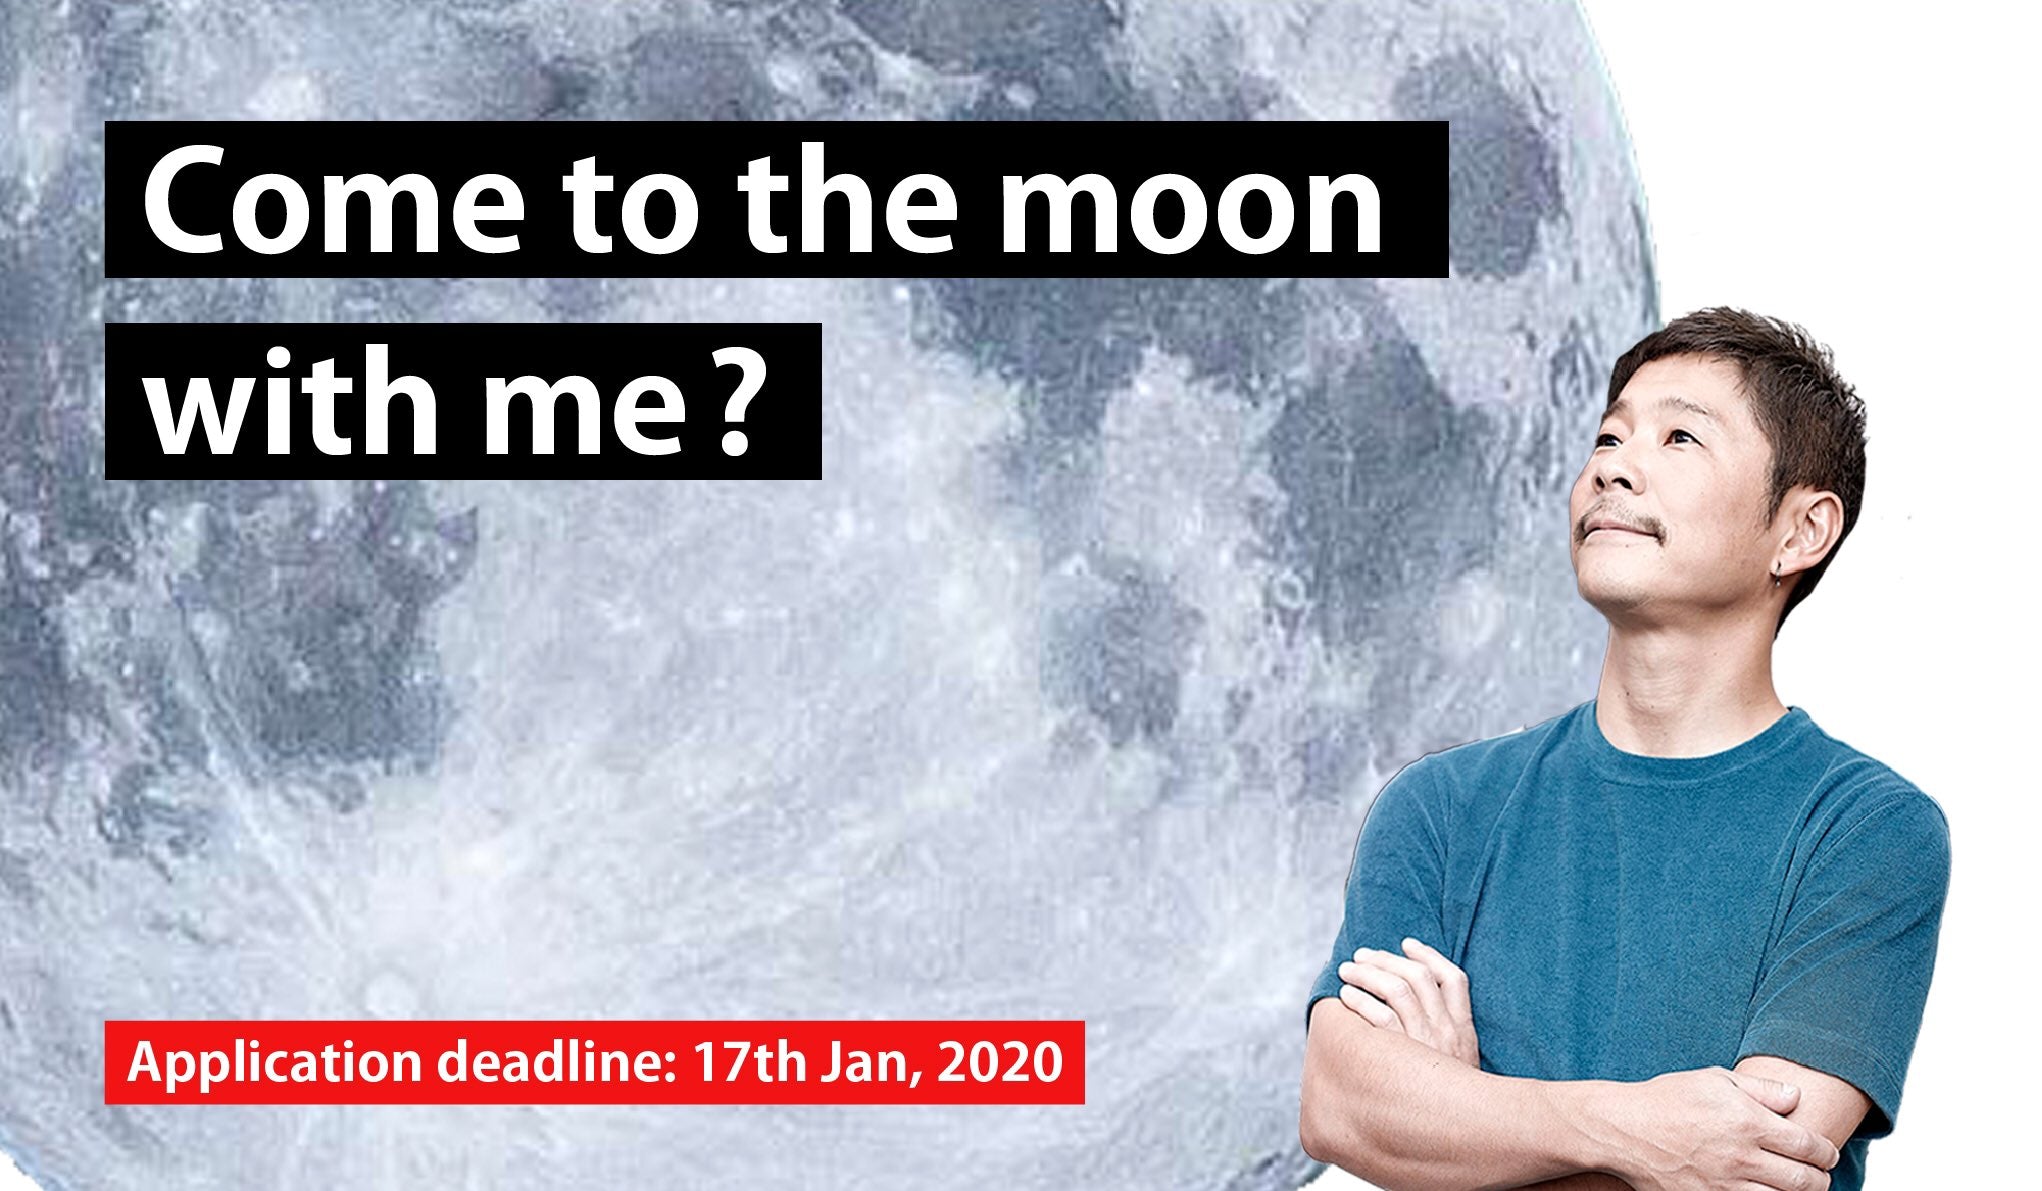 SpaceX will launch Yusaku Maezawa on a voyage to the Moon he is searching for a girlfriend to go with him